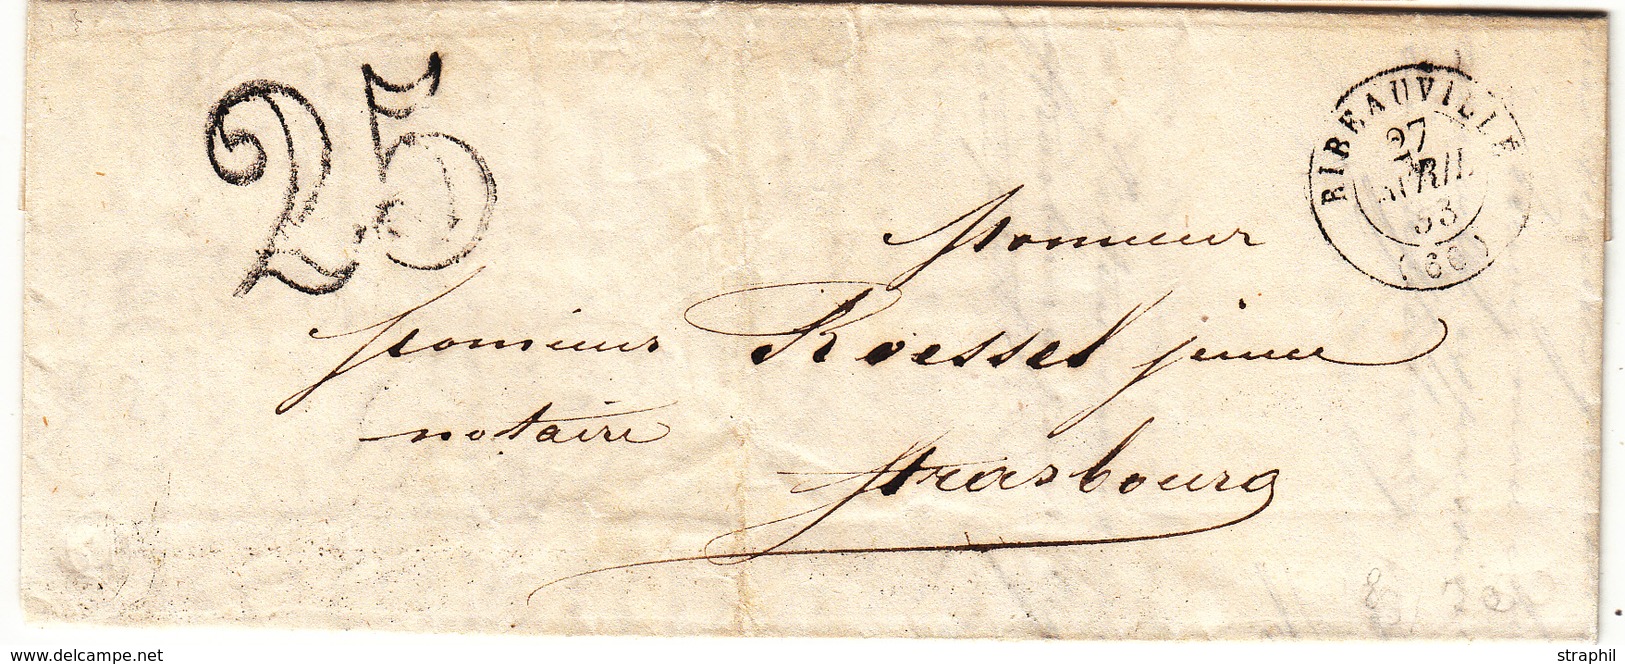 LAC T15 Ribeauvillé (1849) + CF "C"= St Hippolyte + Taxe Tampon 2 - B/TB - Lettres & Documents